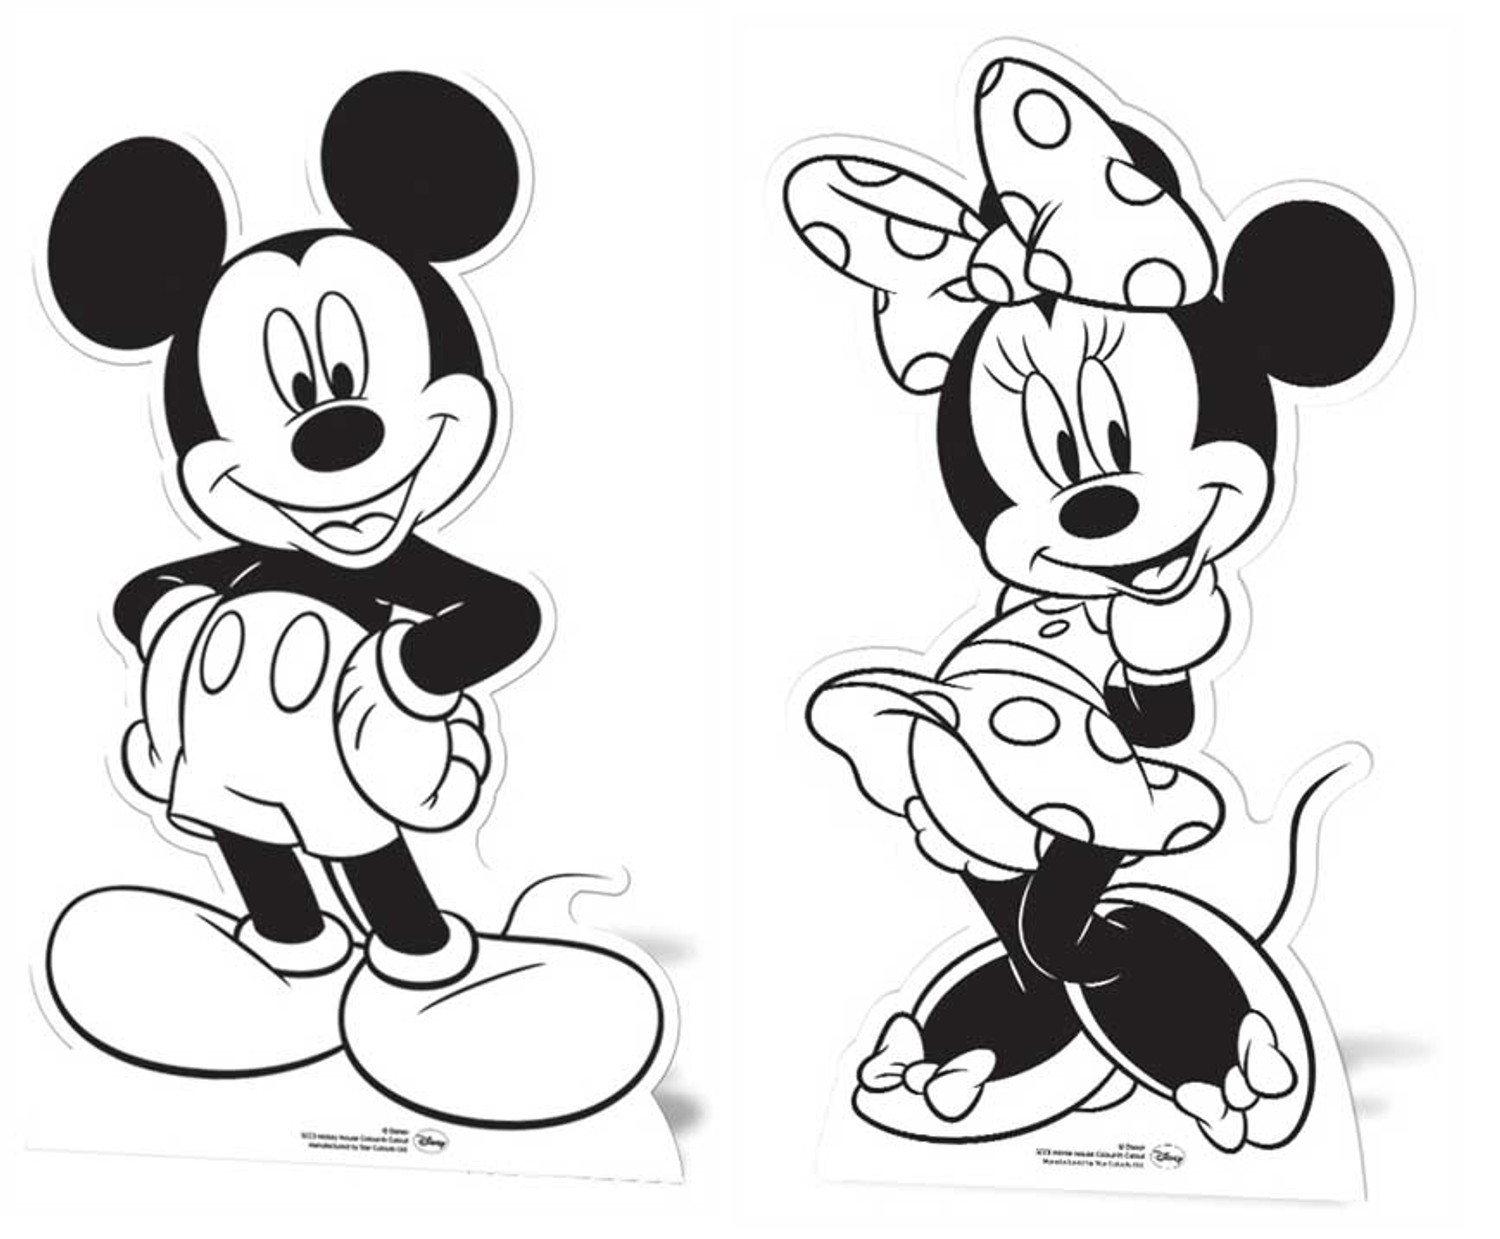 https://cdn11.bigcommerce.com/s-ydriczk/images/stencil/1500x1500/products/86987/86540/Mickey_and_Minnie_Mouse_colour_&_keep_cardboard_cutout_standup_set_buy_now_at_starstills__12960__70577.1394515805.jpg?c=2&imbypass=on